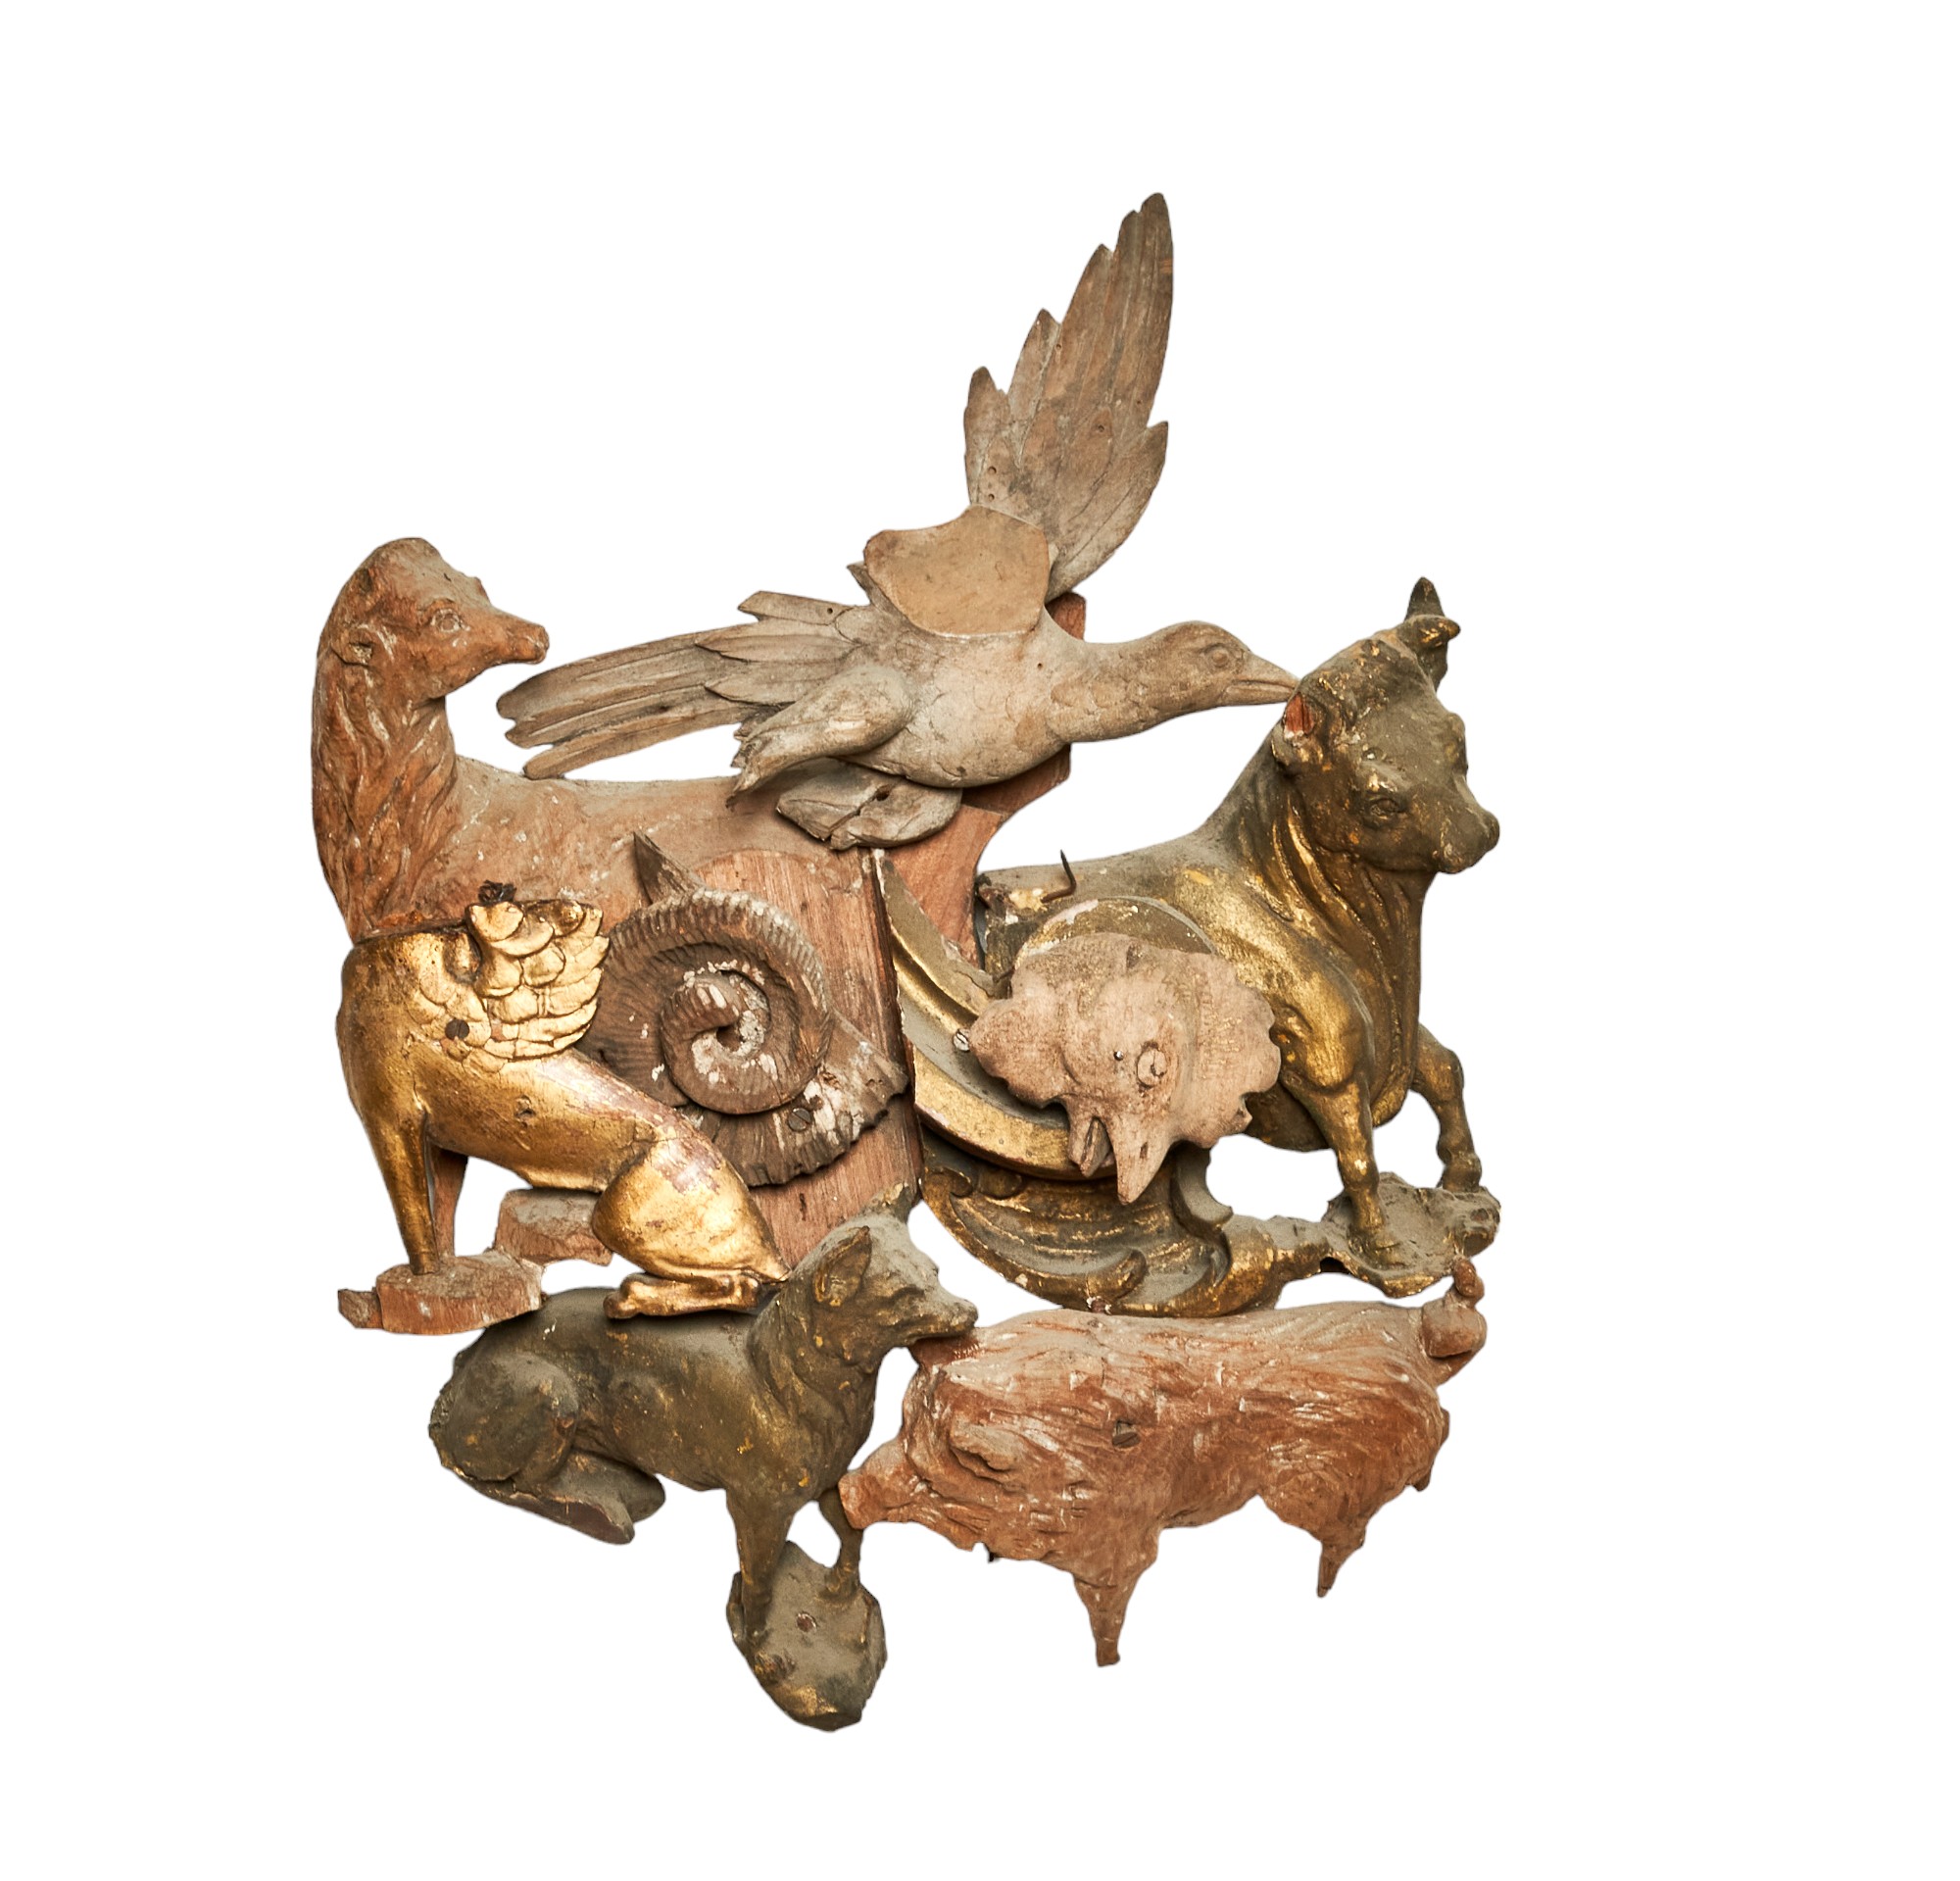 NO RESERVE: British, 19th Century and later, A whimsical assembly of carved animal elements